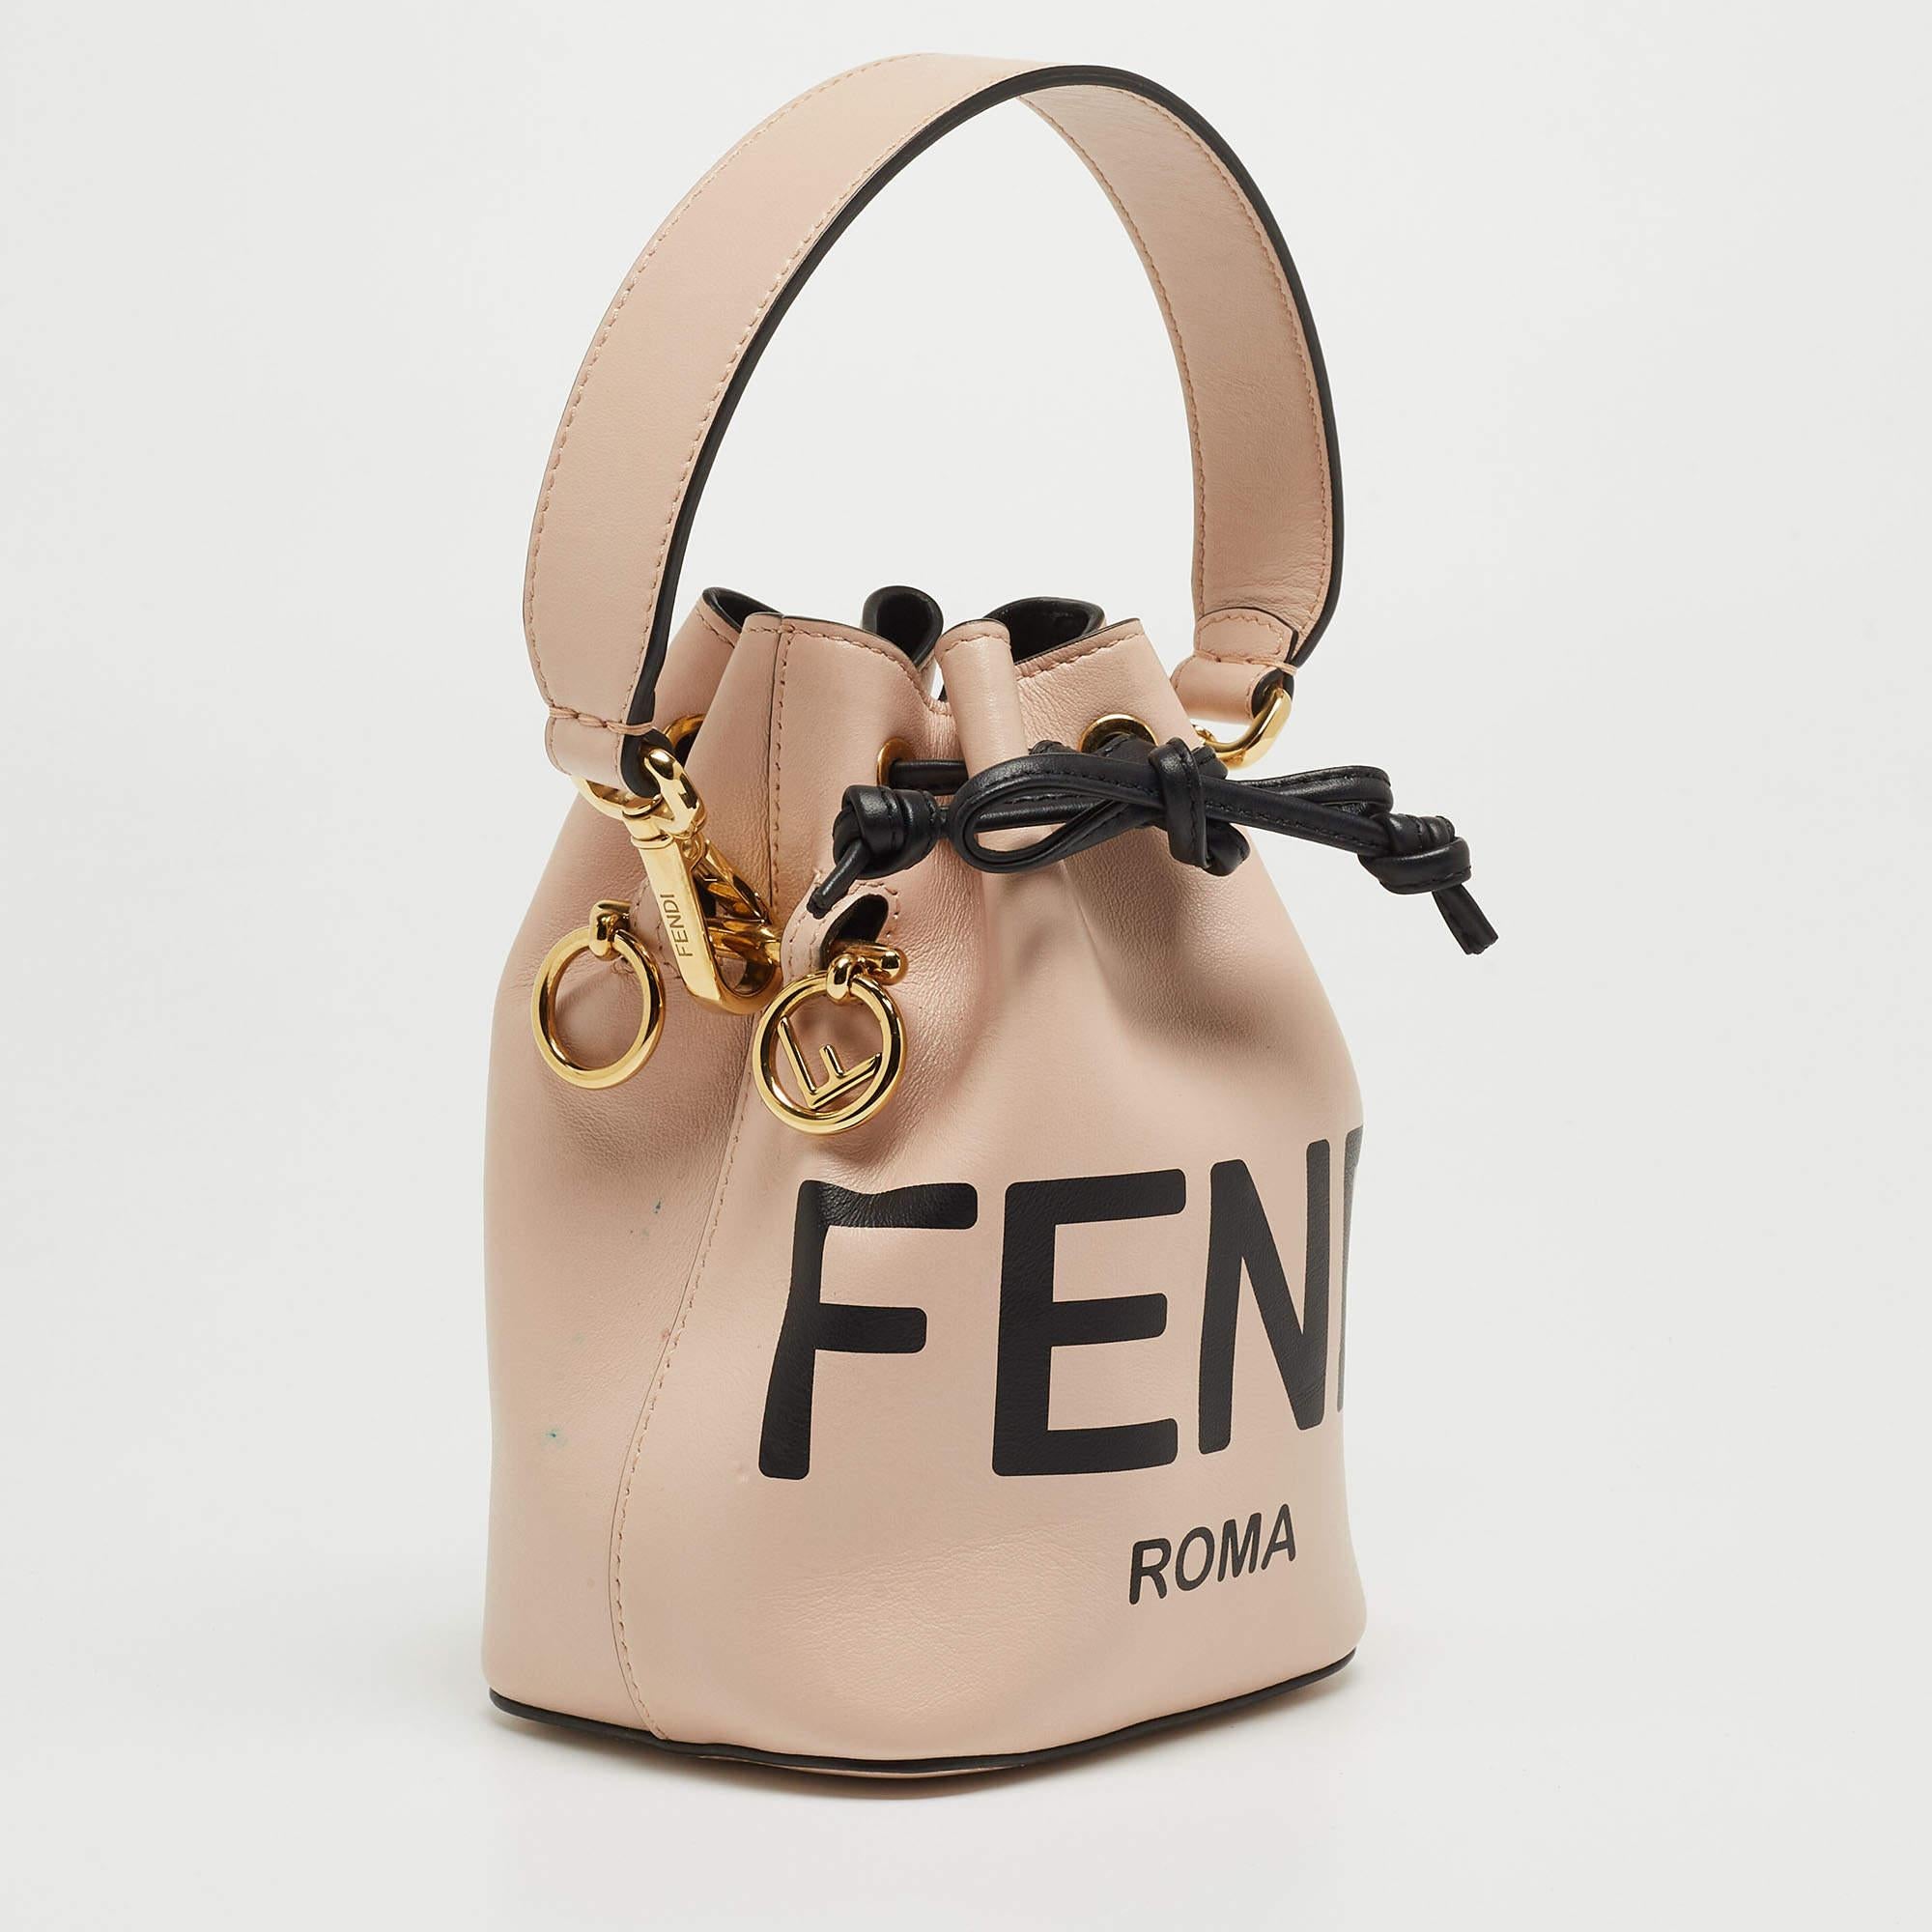 This wonderful Fendi design is made from leather and enhanced with gold-tone hardware. The bag has a bucket shape with a drawstring closure that secures the Alcantara interior. Complete with a top handle, it is an apt accessory to carry your